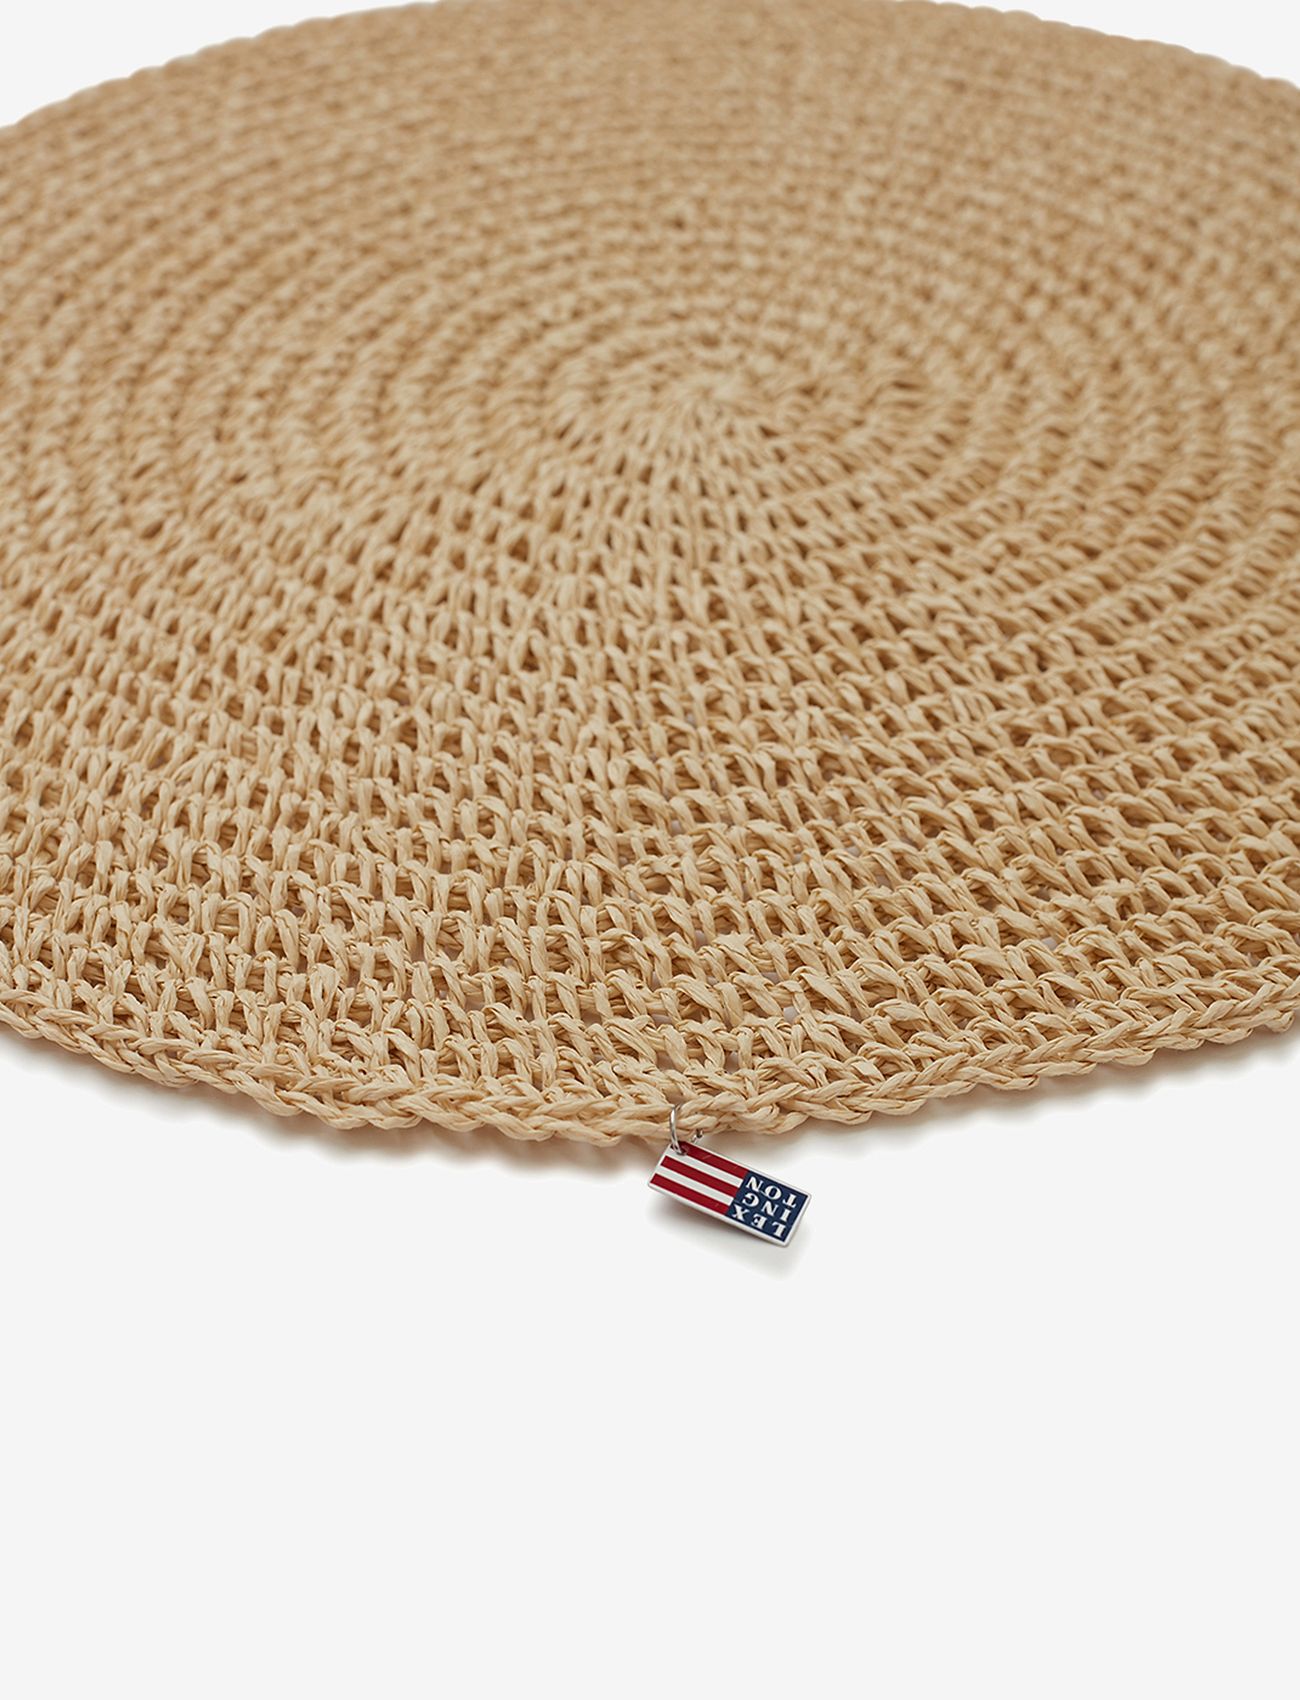 Lexington Home - Round Recycled Paper Straw Placemat - lowest prices - natural - 1